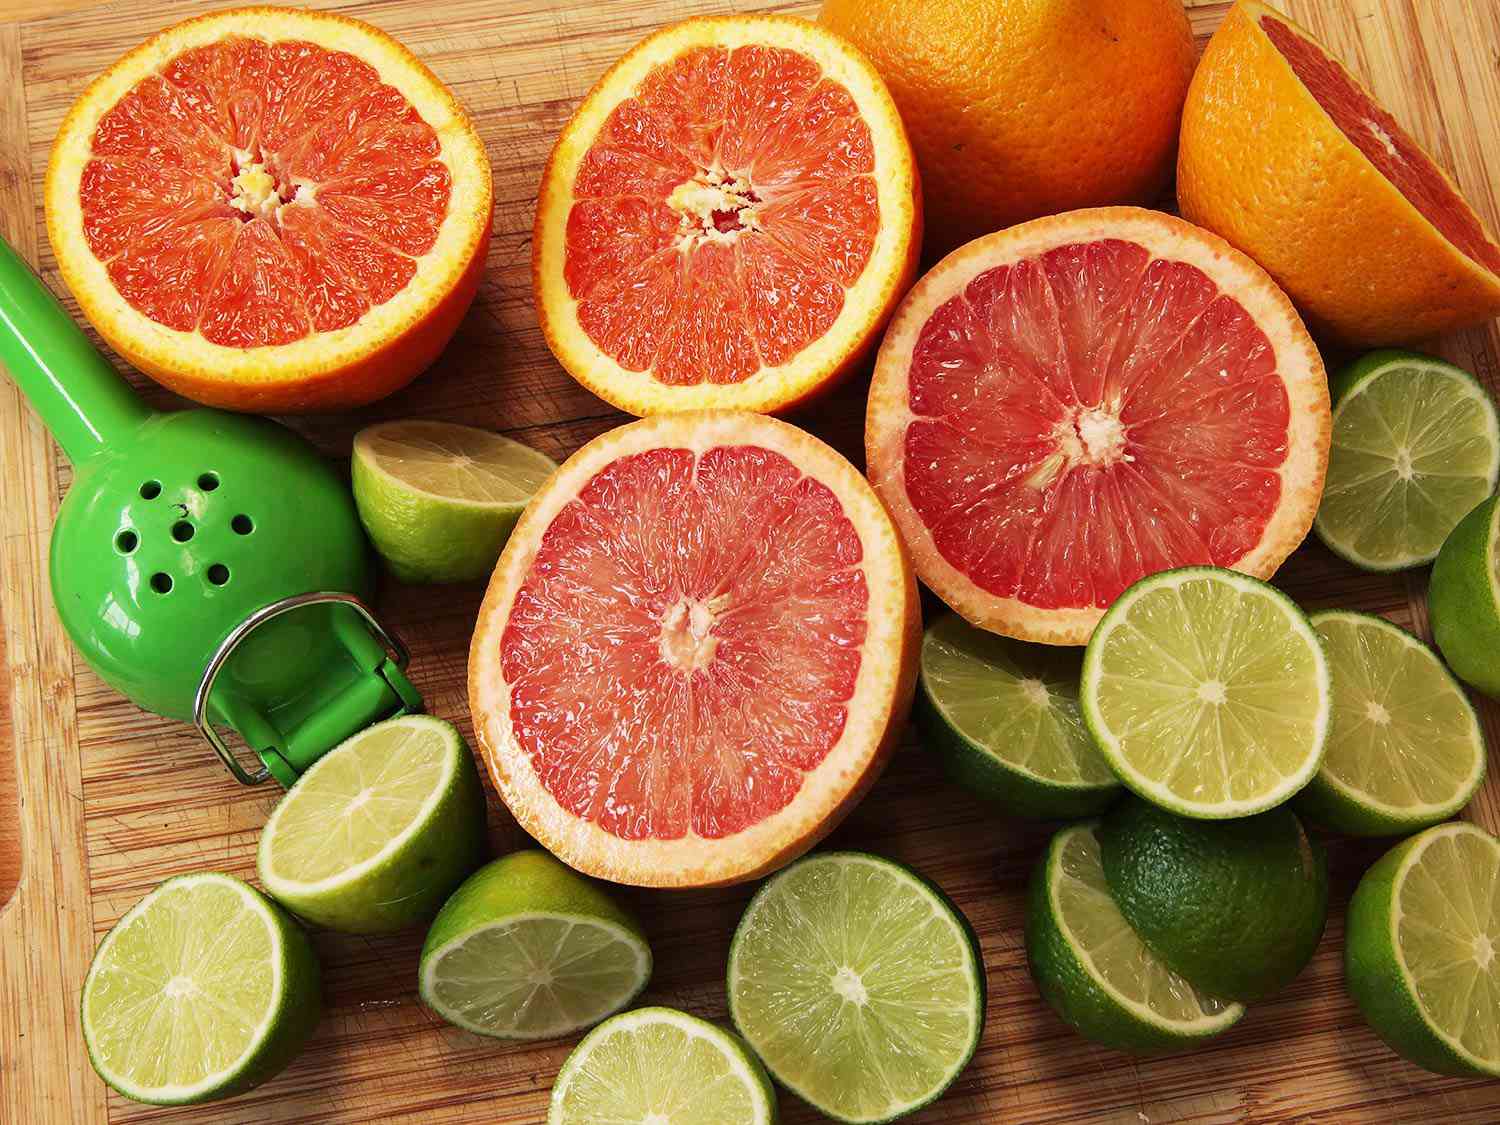 Cut open grapefruits and limes with a juice squeezer.